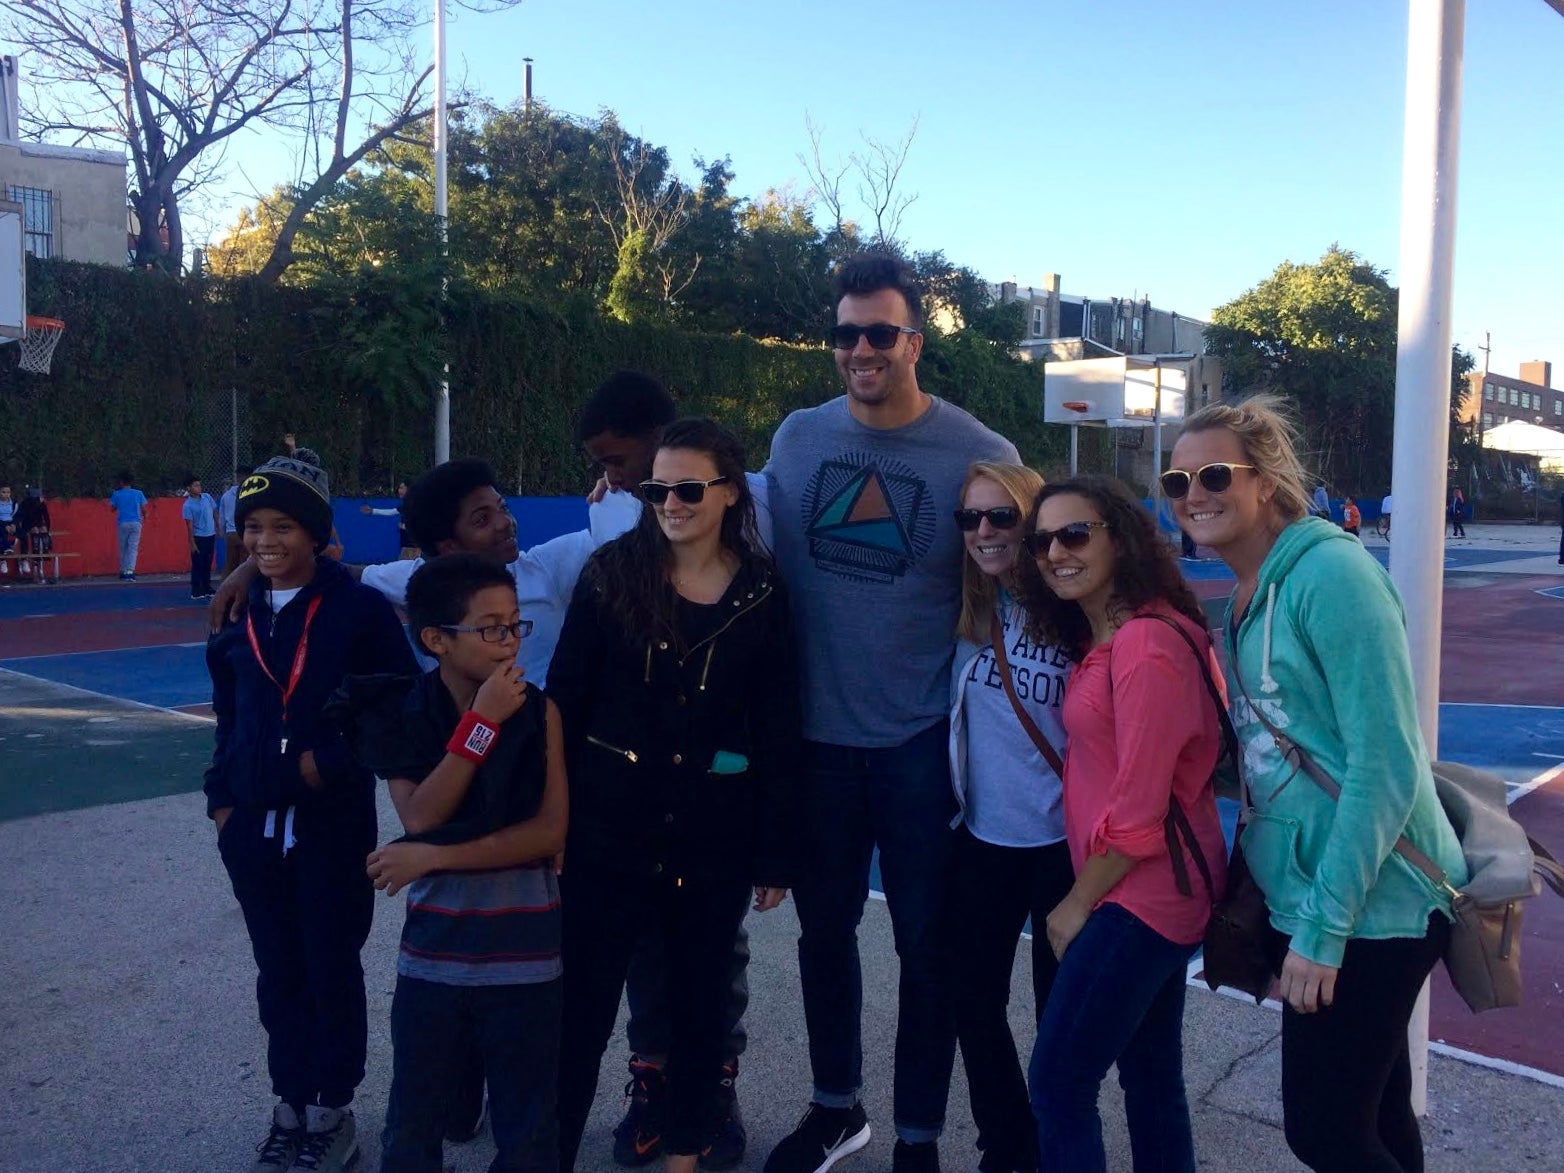 Connor Barwin's MTWB Foundation is investing in improvements to Waterloo Playground